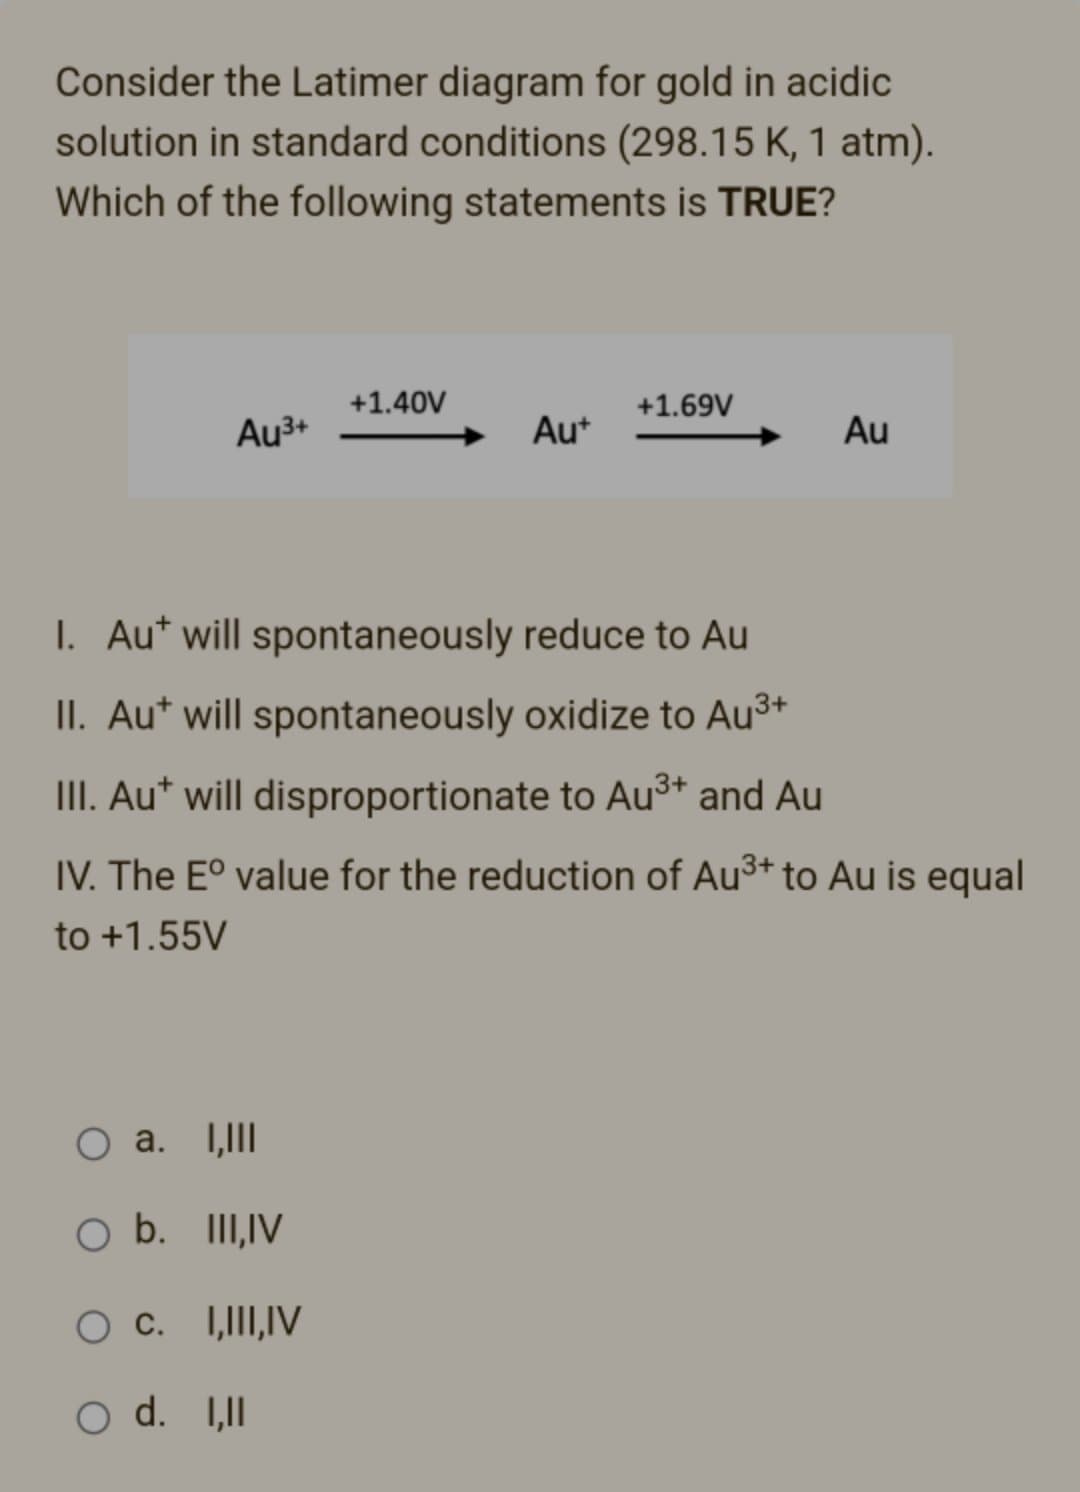 Consider the Latimer diagram for gold in acidic
solution in standard conditions (298.15 K, 1 atm).
Which of the following statements is TRUE?
+1.40V
+1.69V
Au³+
Au+
Au
I. Aut will spontaneously reduce to Au
II. Aut will spontaneously oxidize to Au³+
III. Aut will disproportionate to Au³+ and Au
IV. The Eº value for the reduction of Au³+ to Au is equal
to +1.55V
O a. I,III
O b. III, IV
O C. I,III,IV
O d. I,II